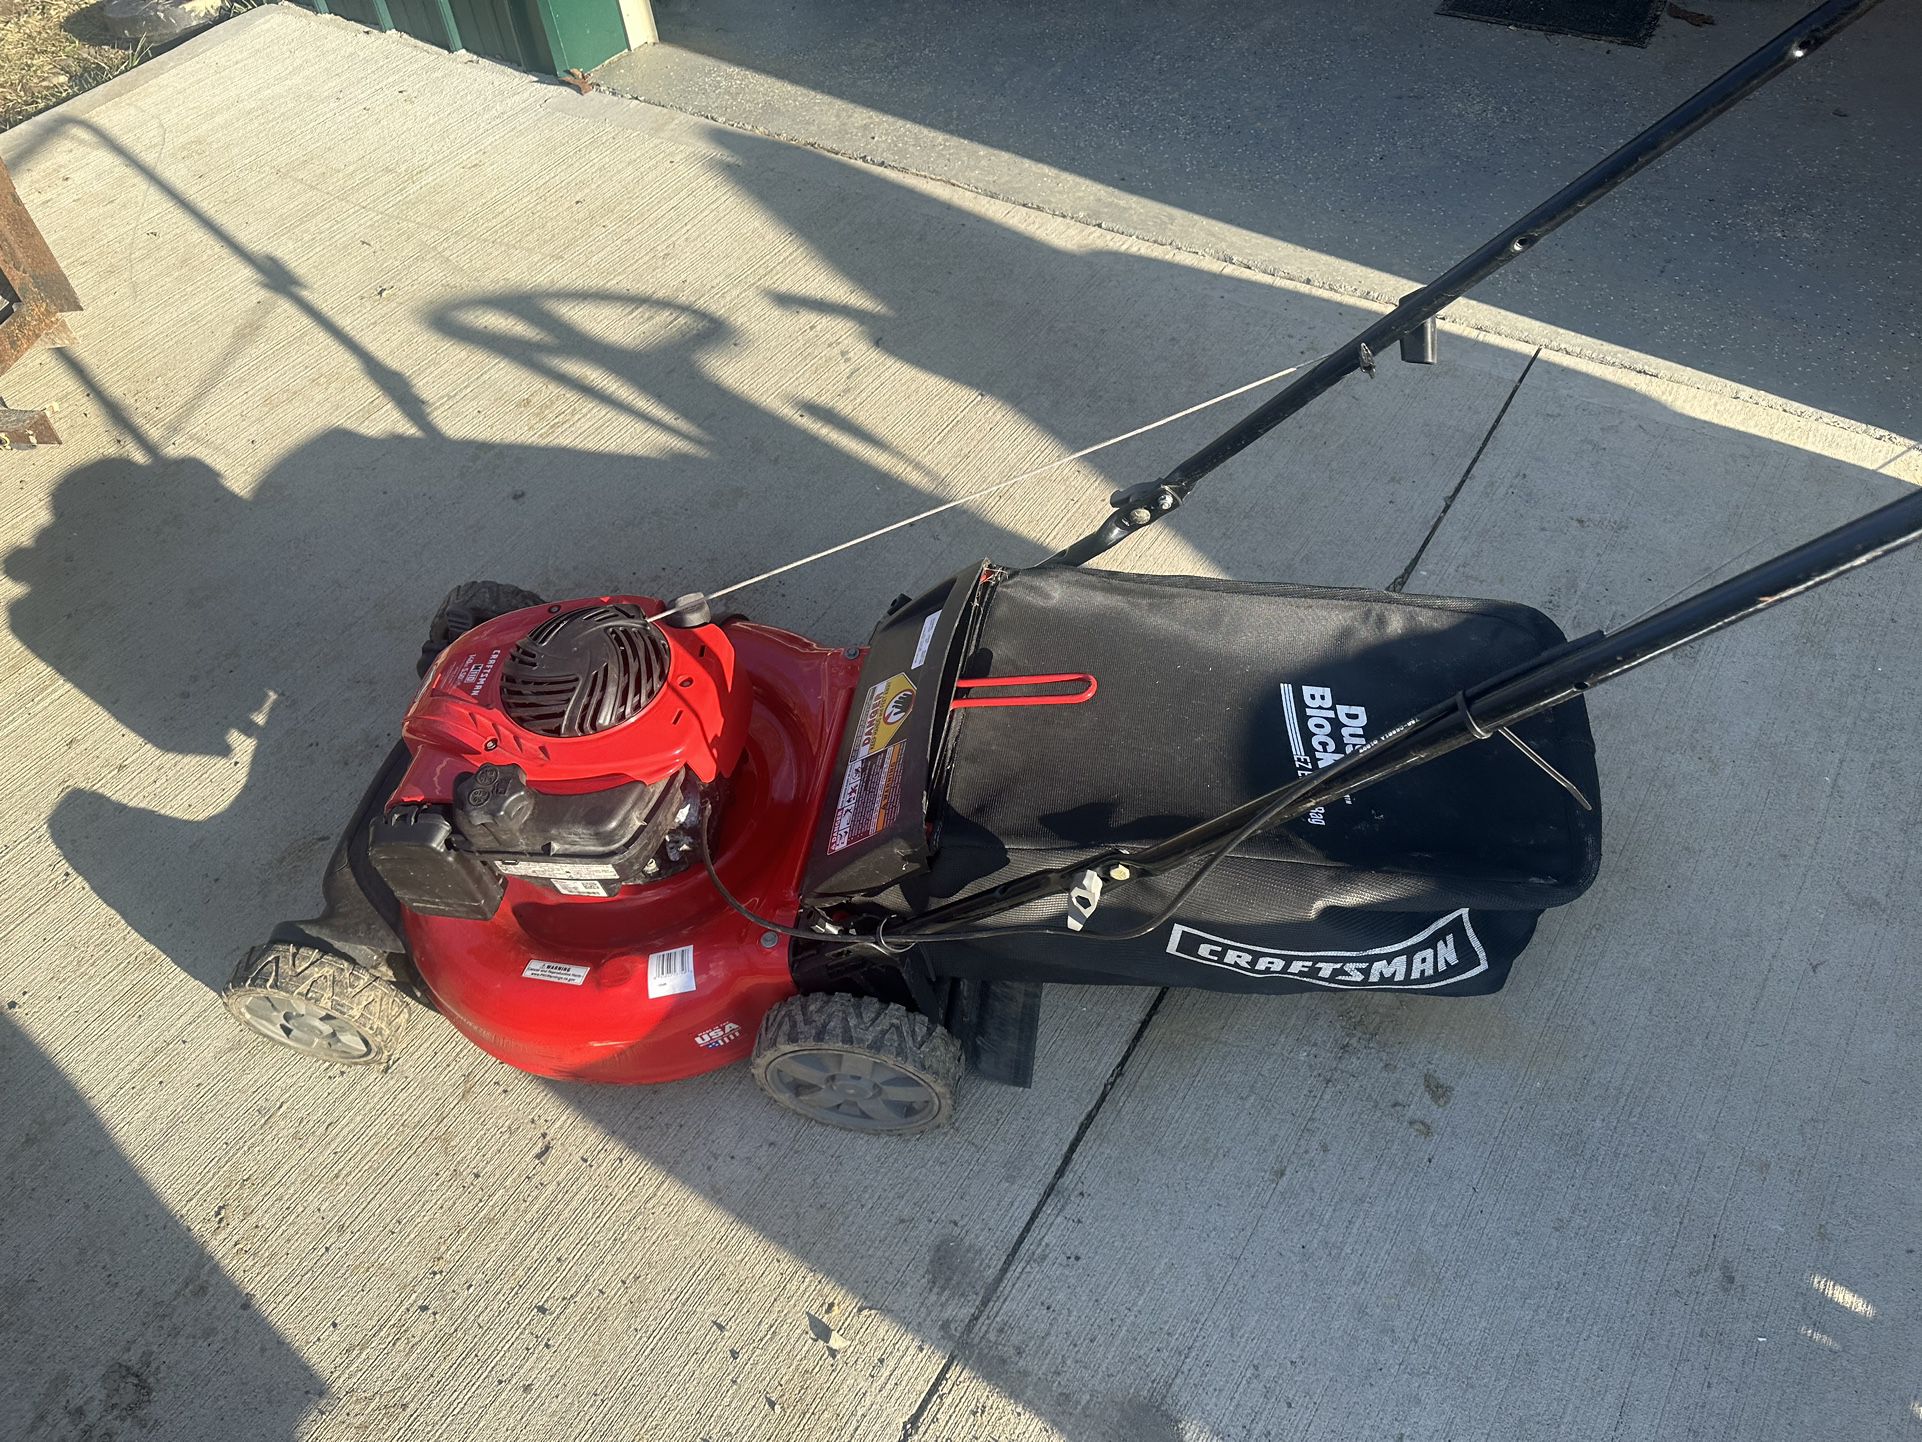 CRAFTSMAN M110 21" 3-in-1 Gas Mower Bagger 140CC RETAILS $398 SELLING ONLY $250